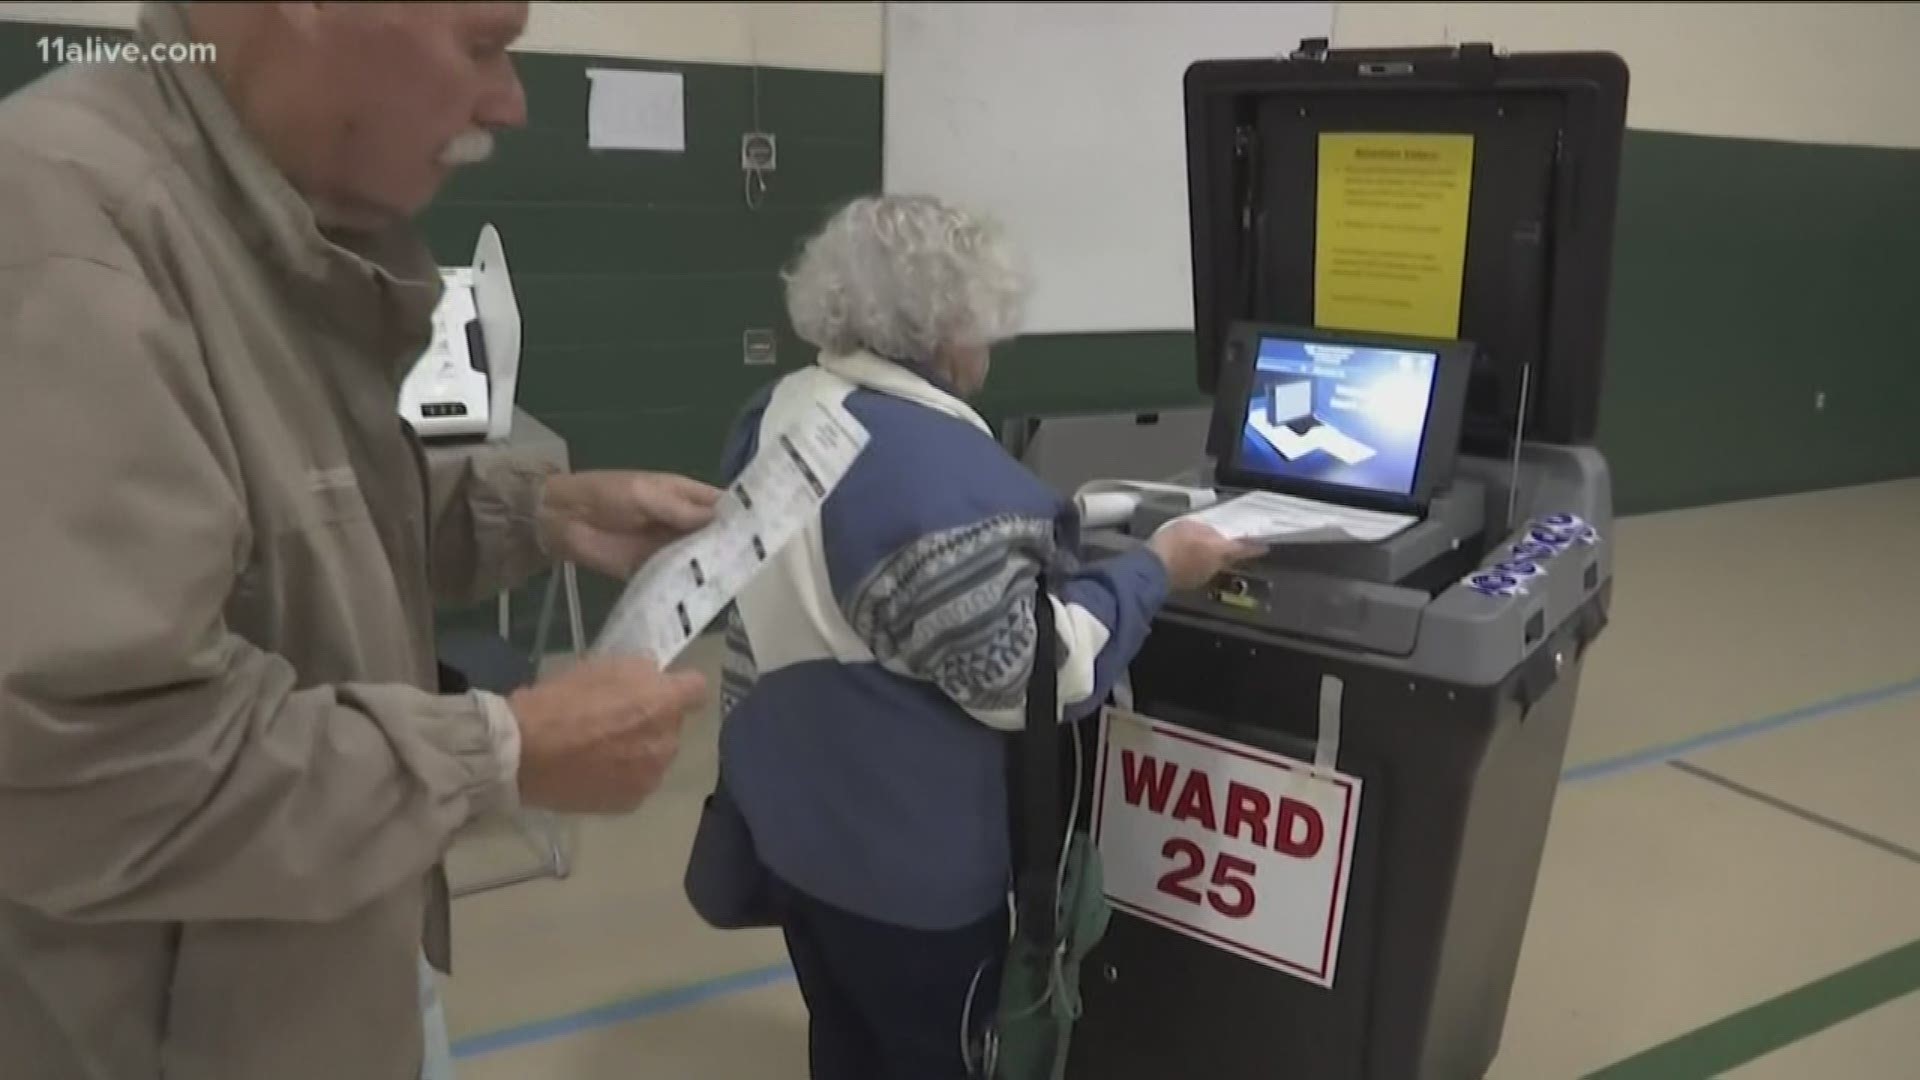 Critics say the new voting system – which produces a computer-marked paper ballot --- doesn't reliably show voters who they picked.